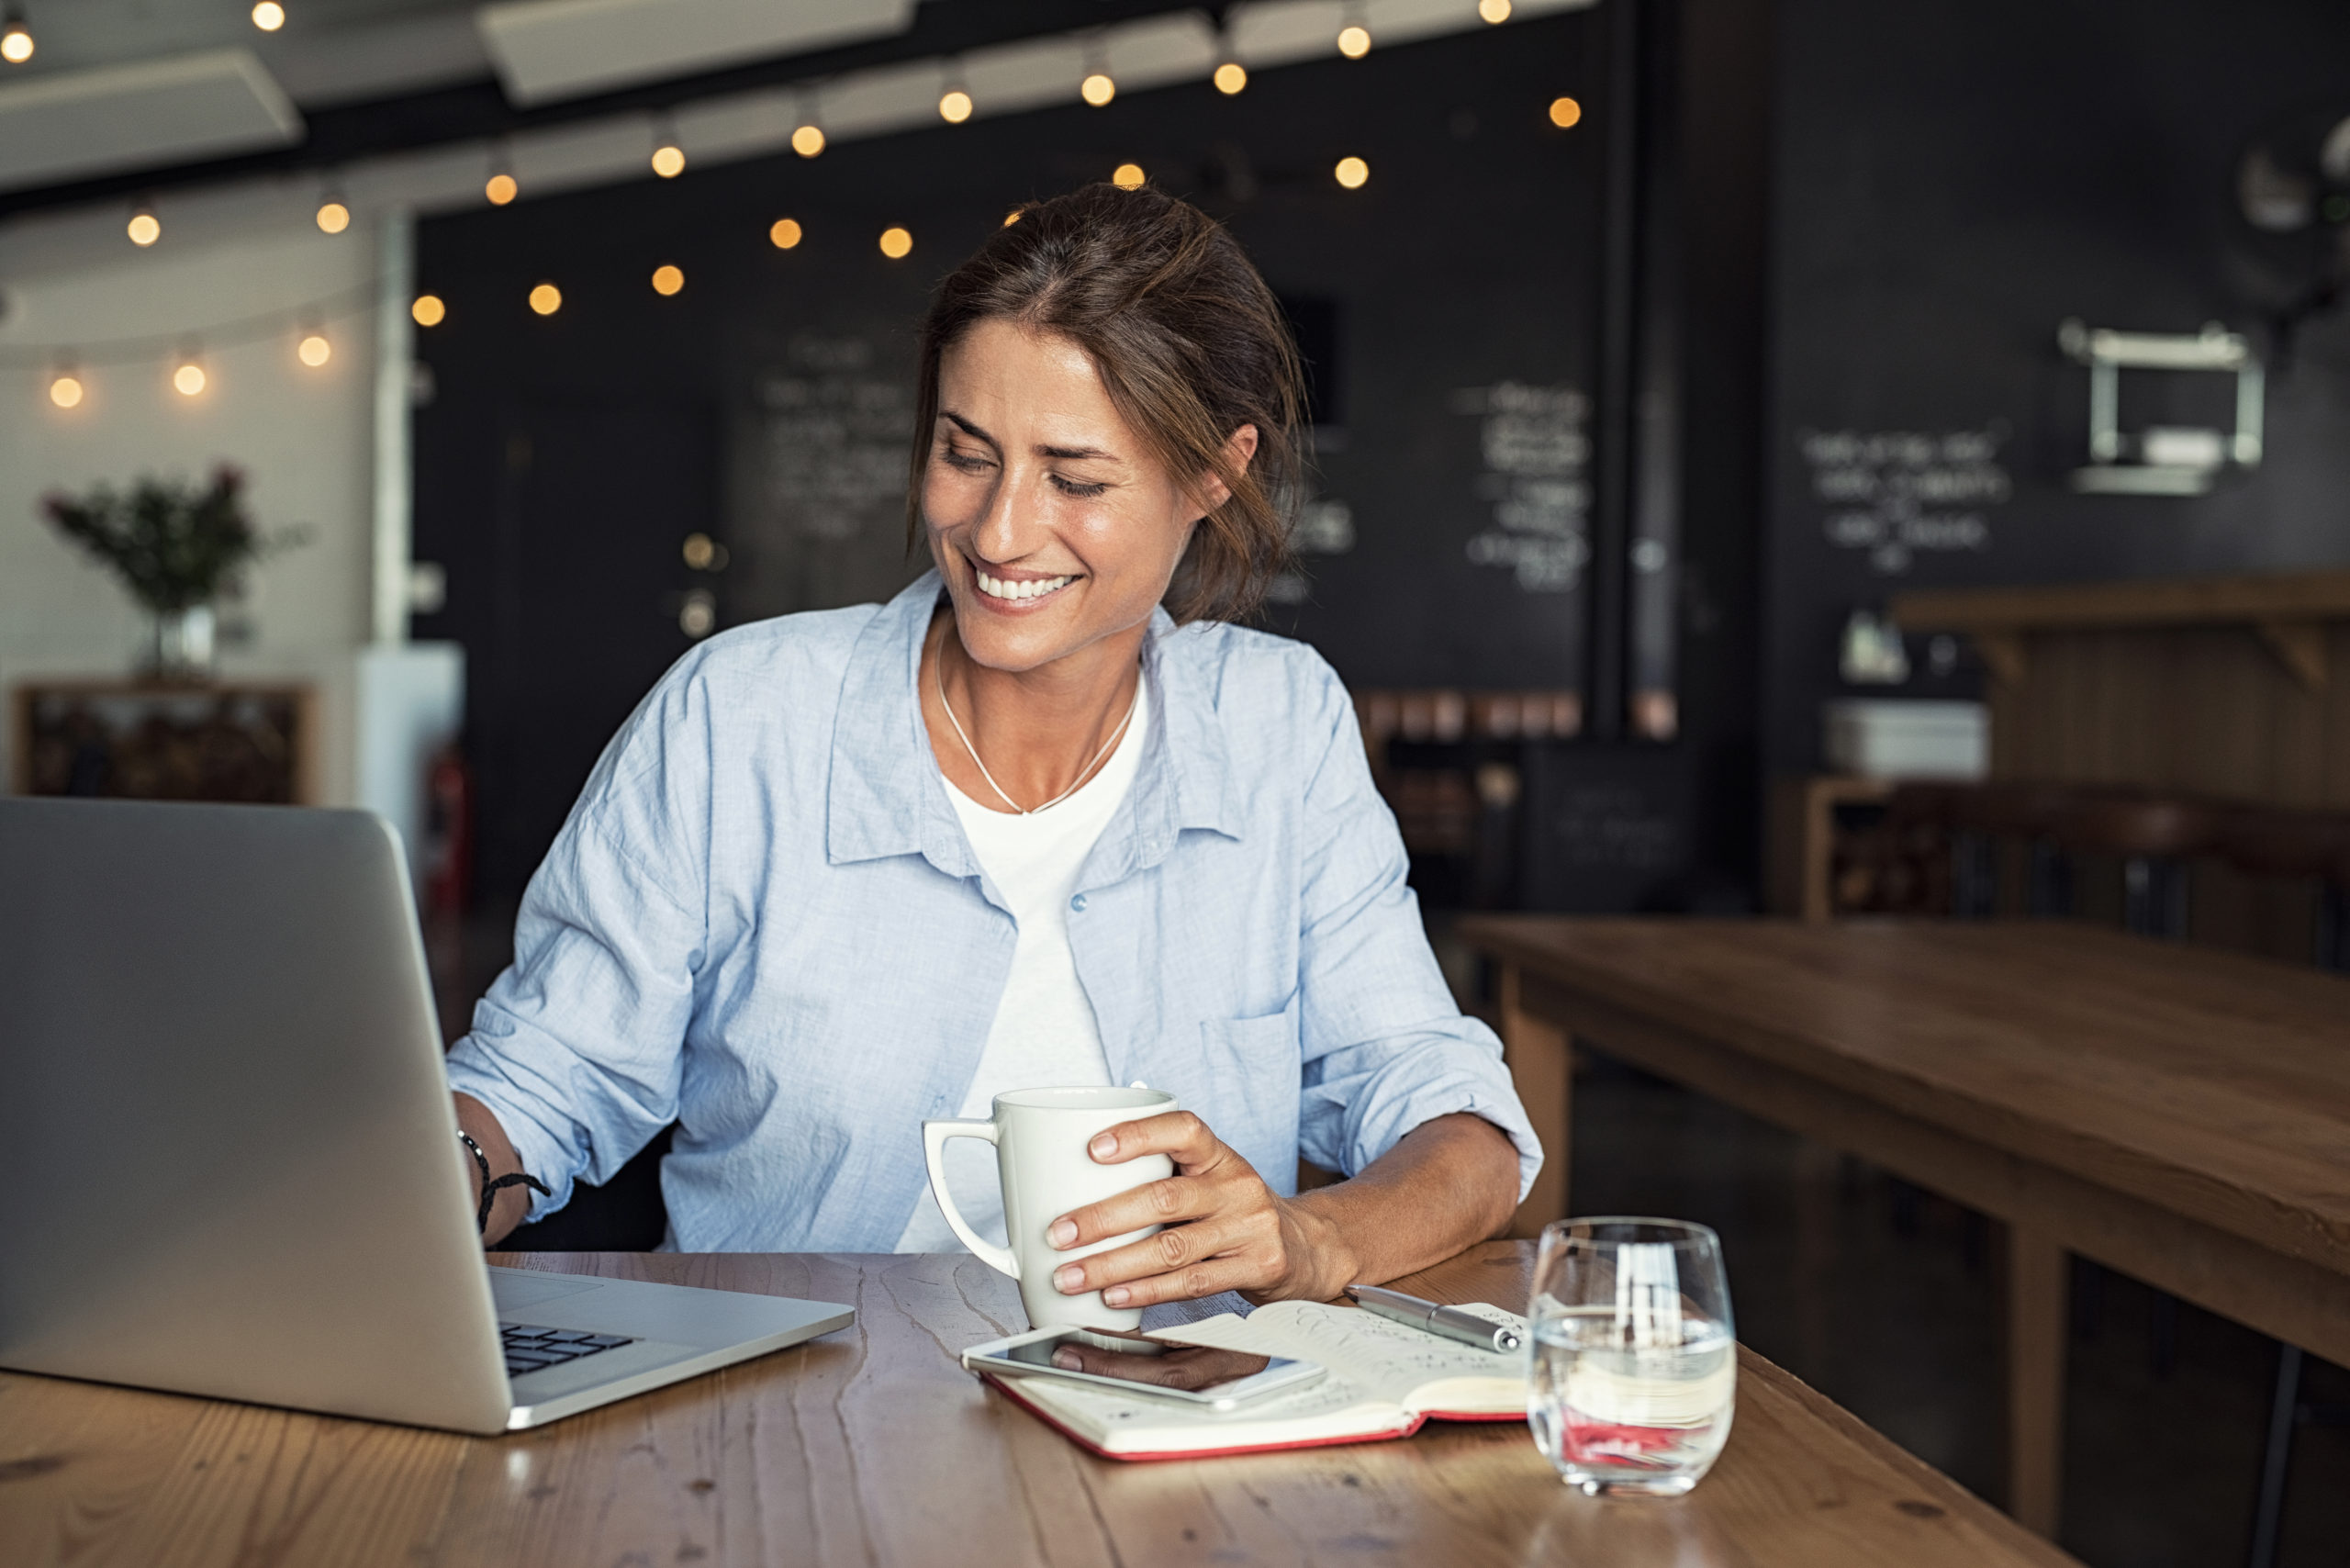 Smiling woman sitting in cafeteria holding coffee mug and working on laptop. Businesswoman checking email on laptop. Beautiful middle aged woman smiling and using laptop at cafe while drinking a cup of tea.